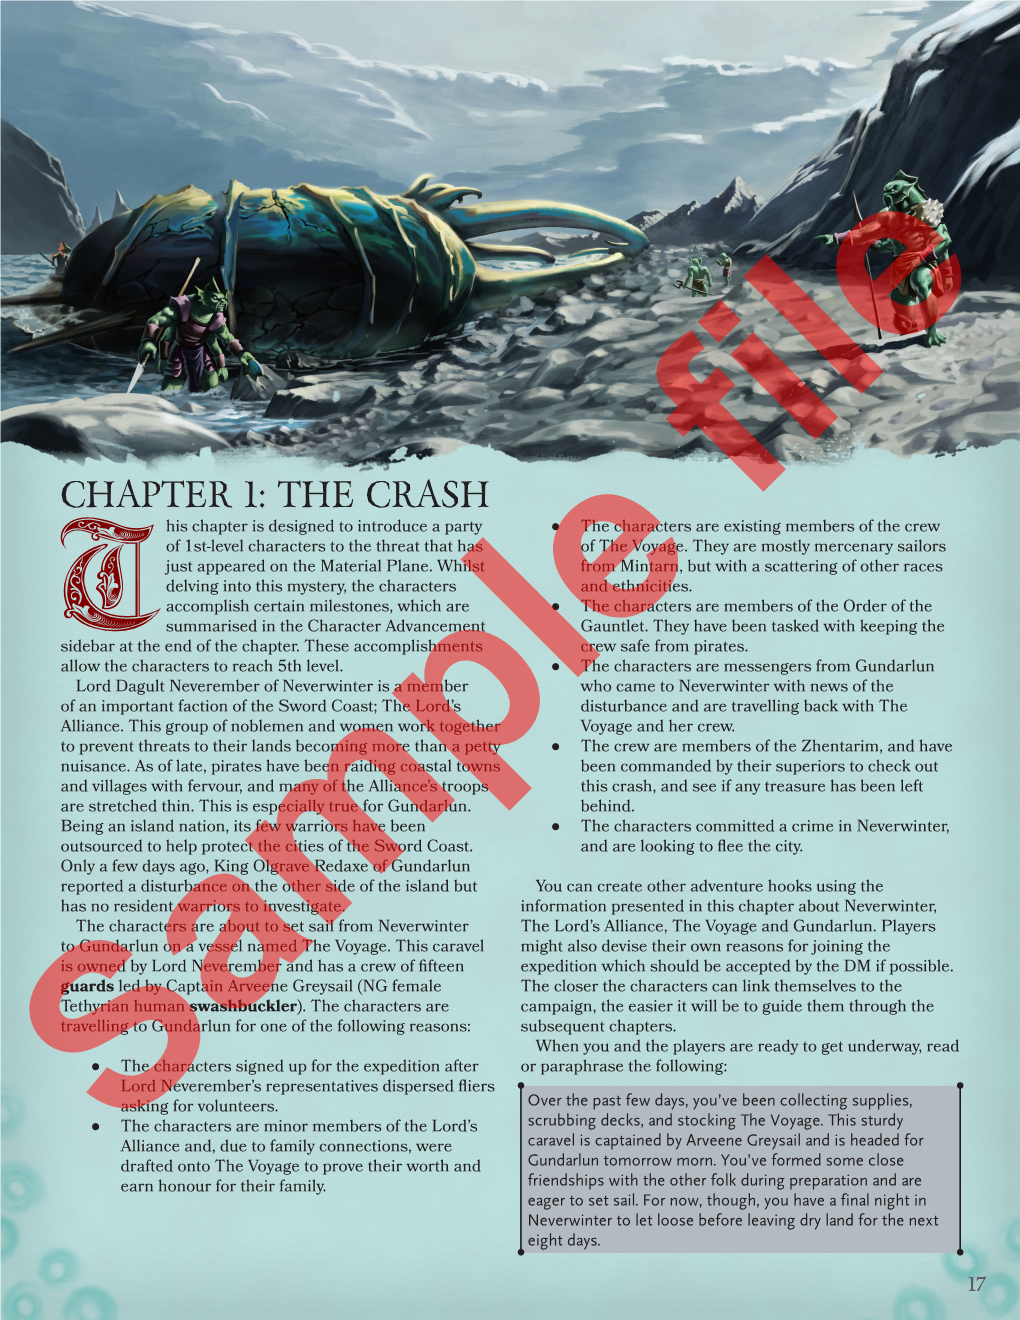 Chapter 1: the Crash